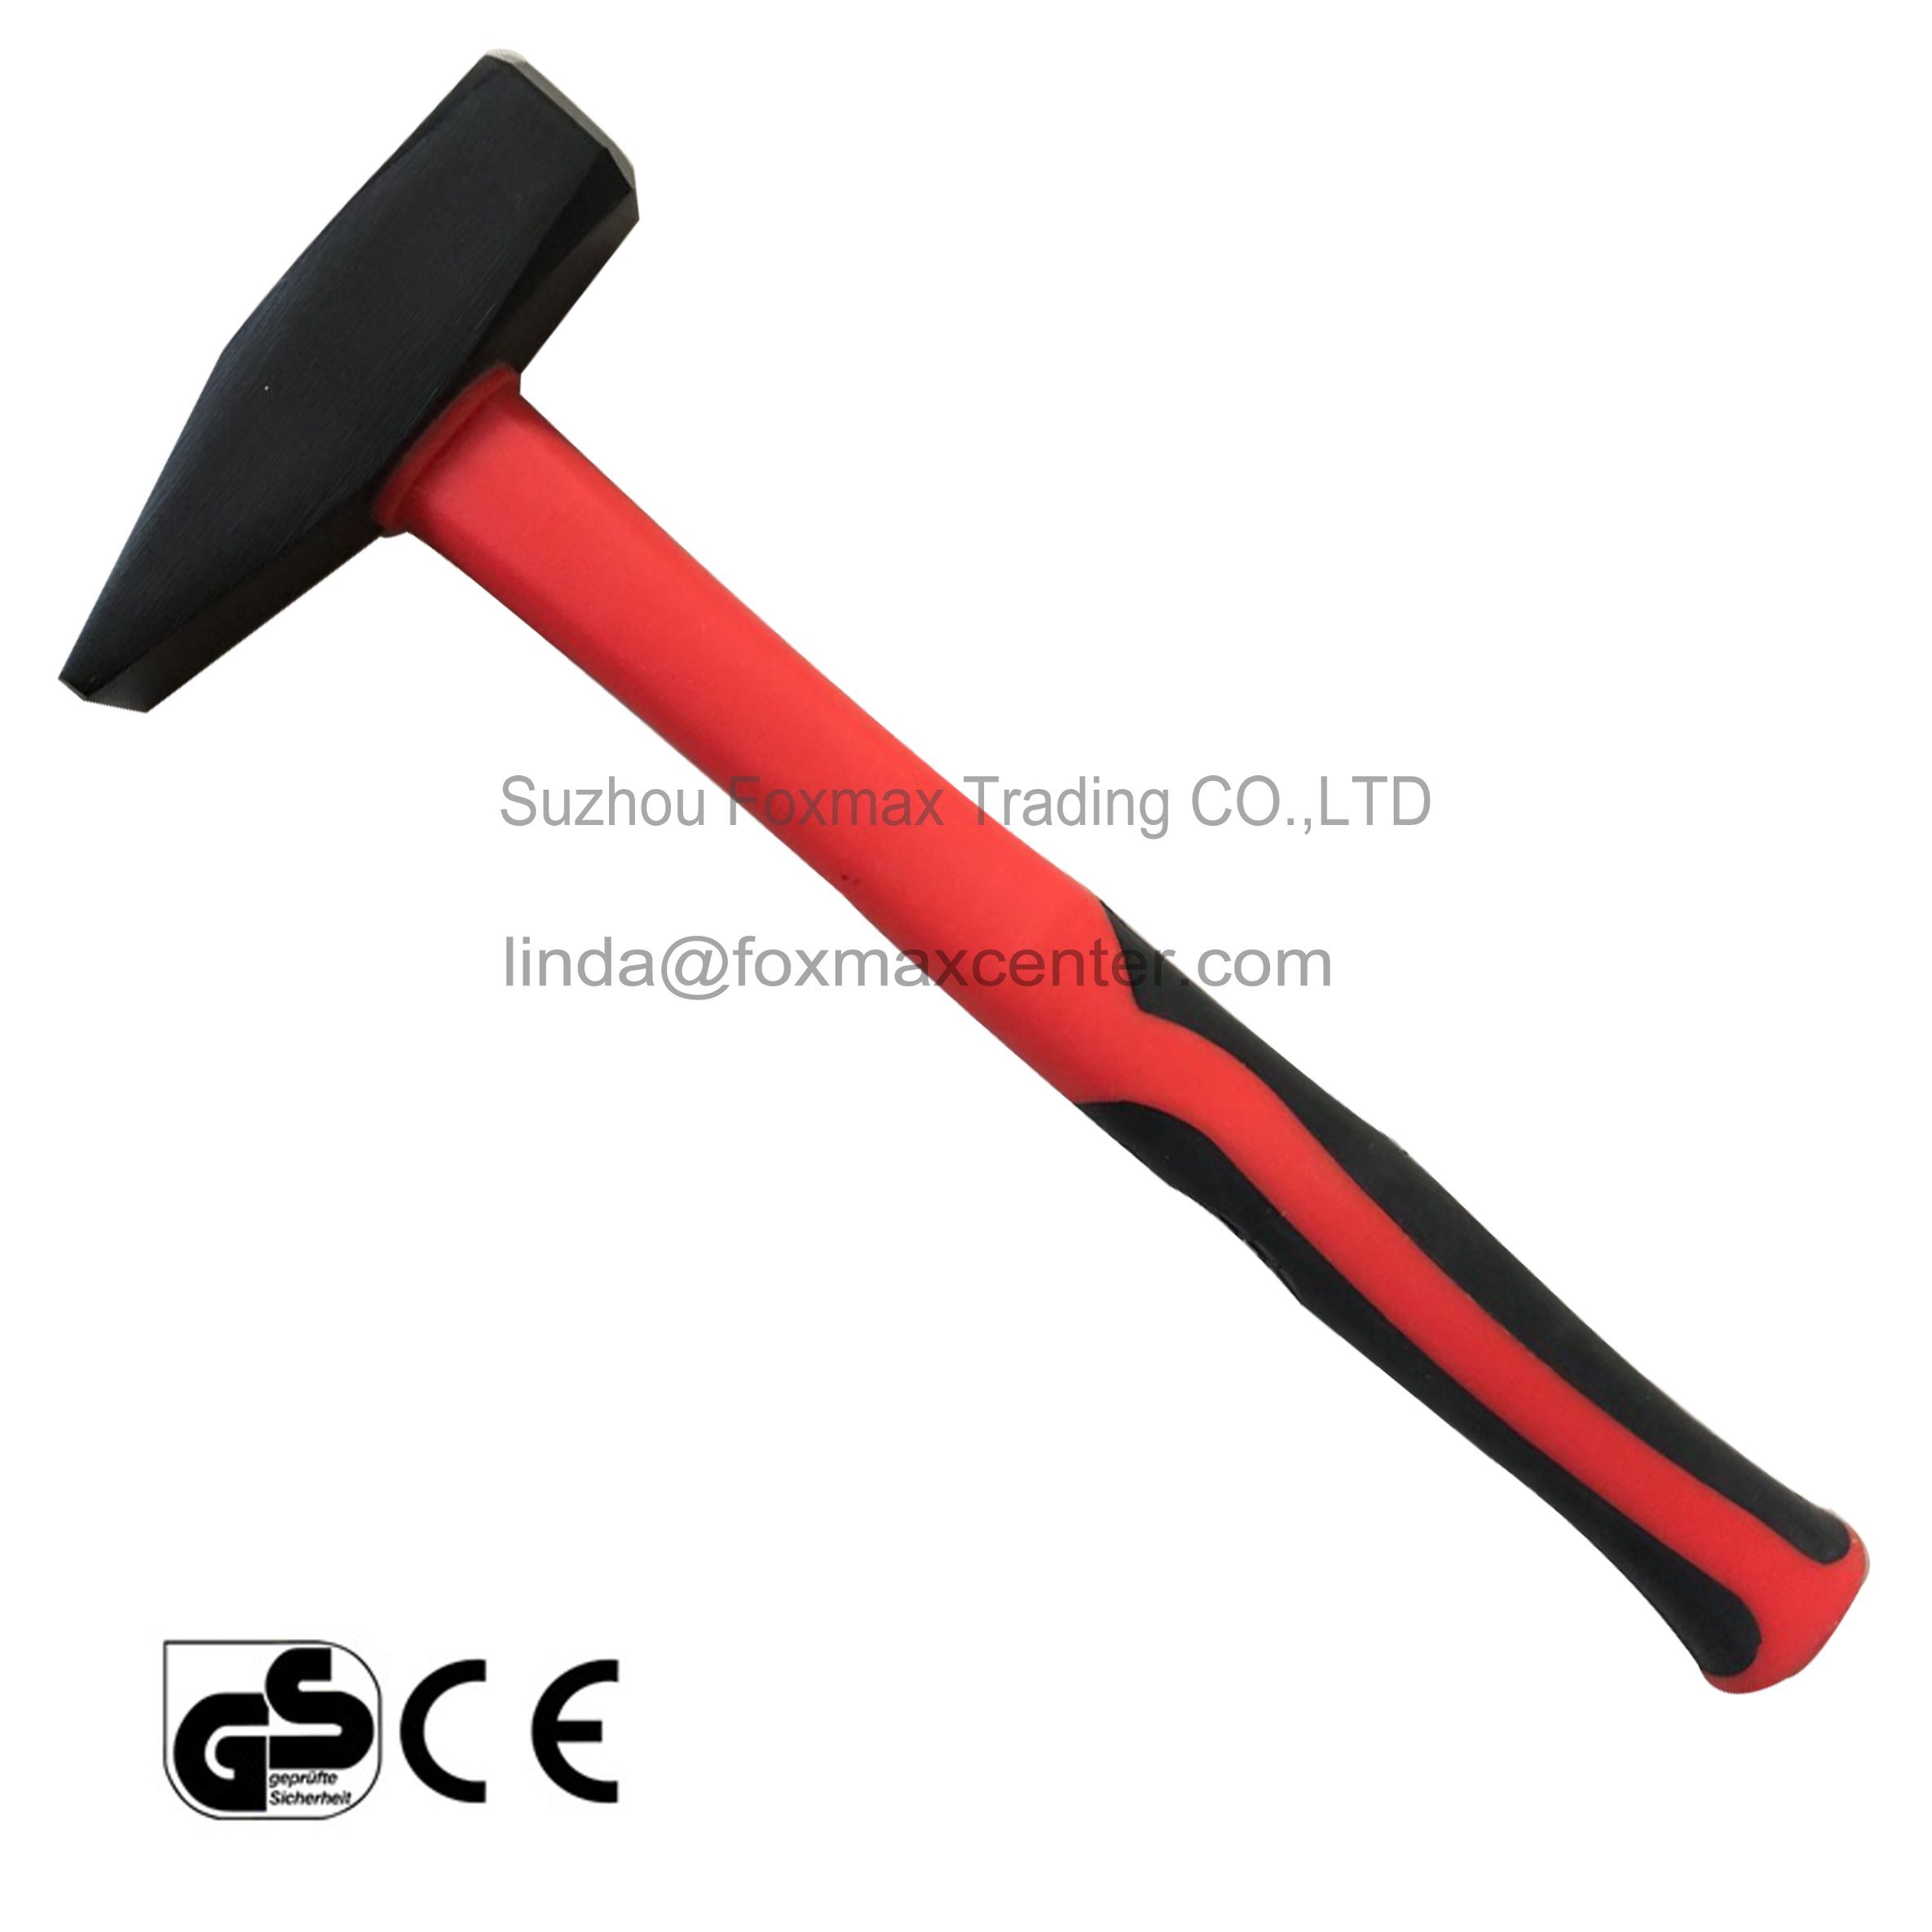 Machinist's Hammer with Plastic Handle (HM-014)